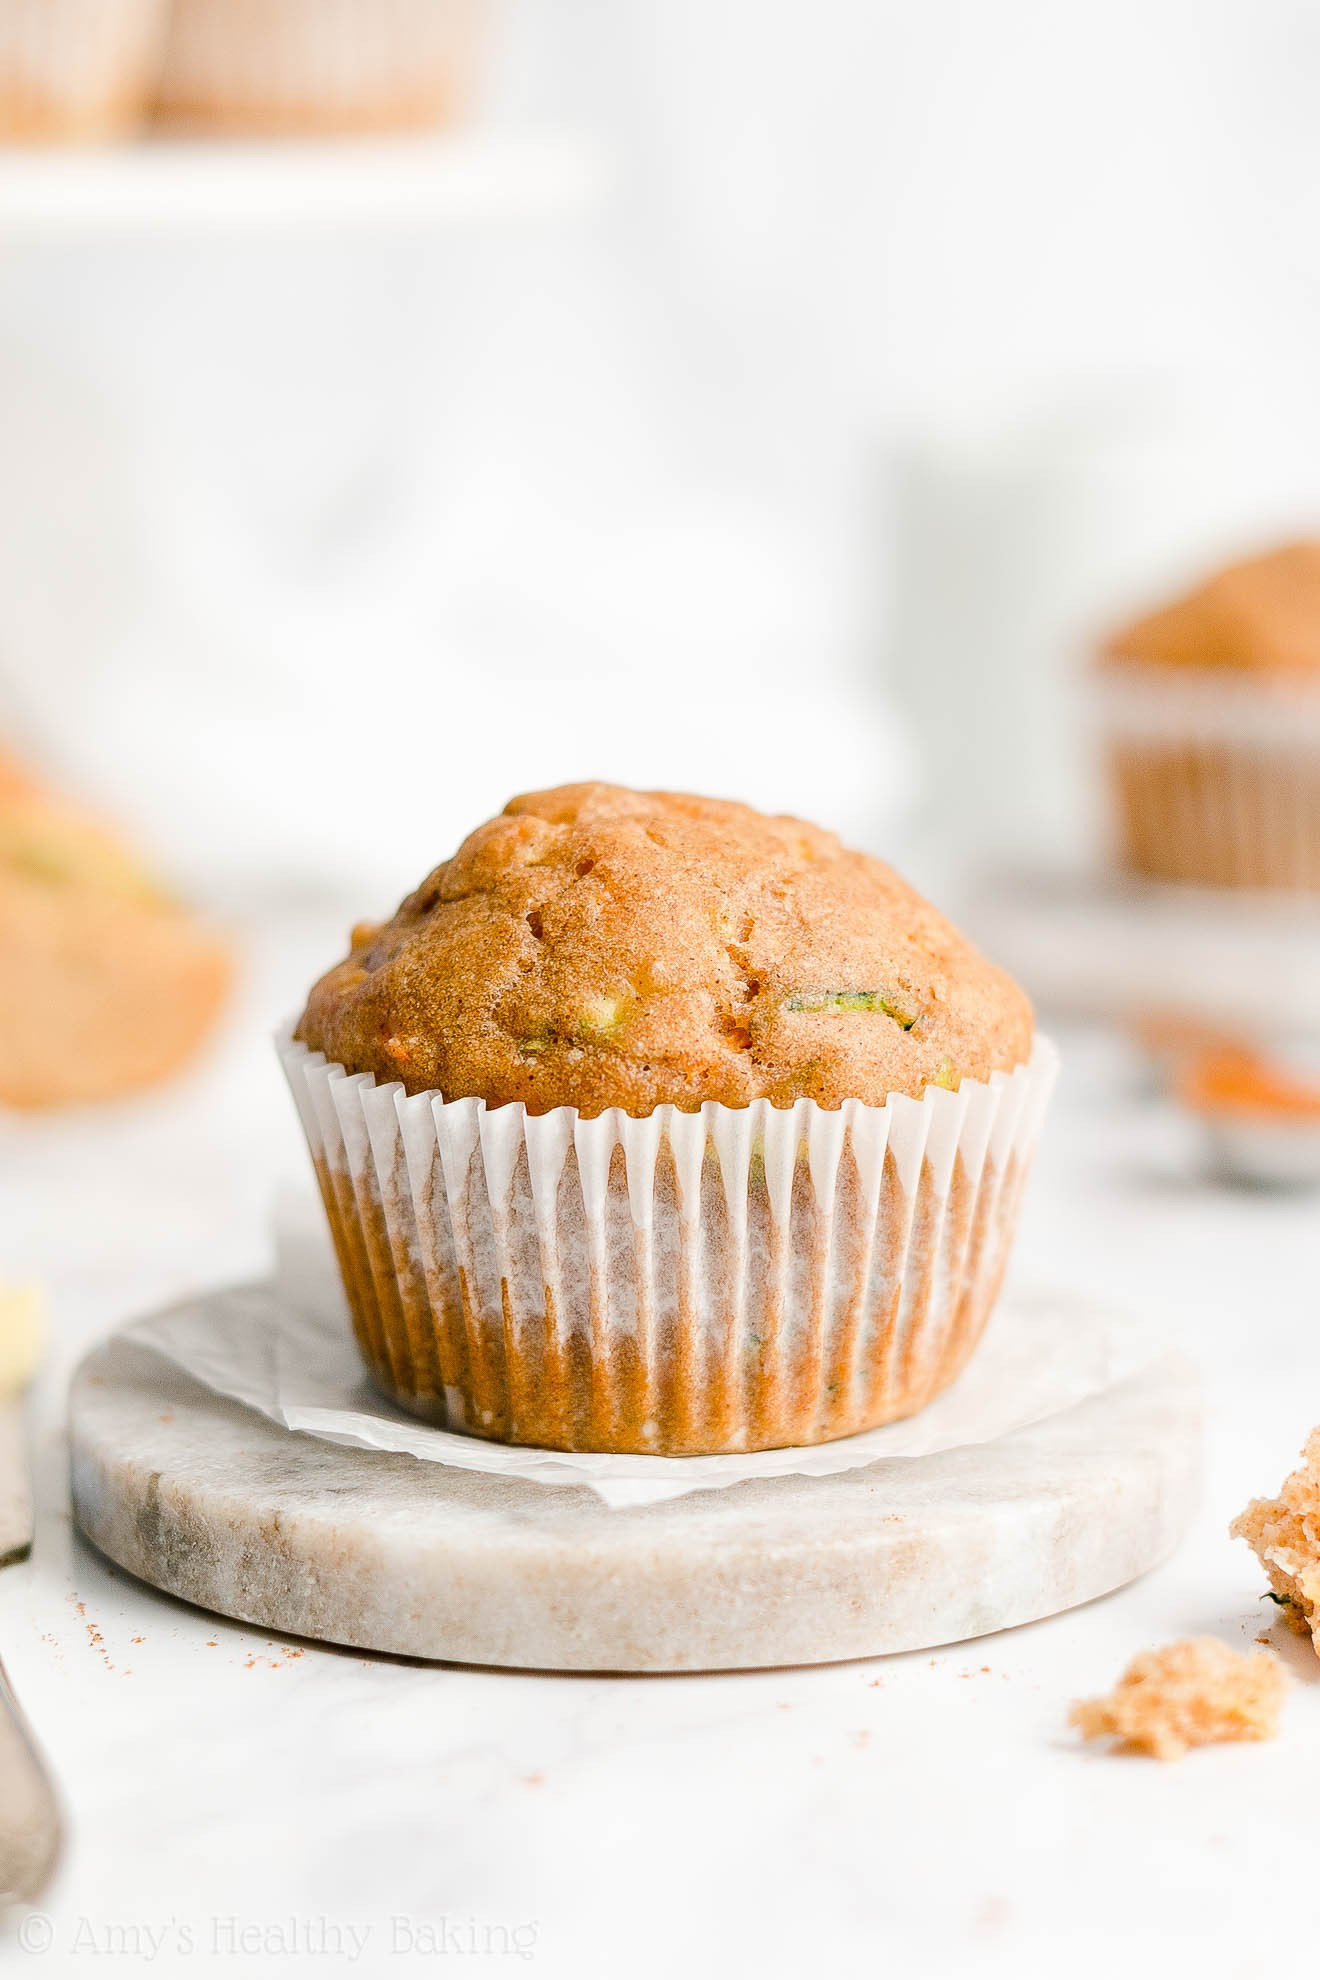 Zucchini Muffins Healthy
 Healthy Spiced Carrot Zucchini Muffins